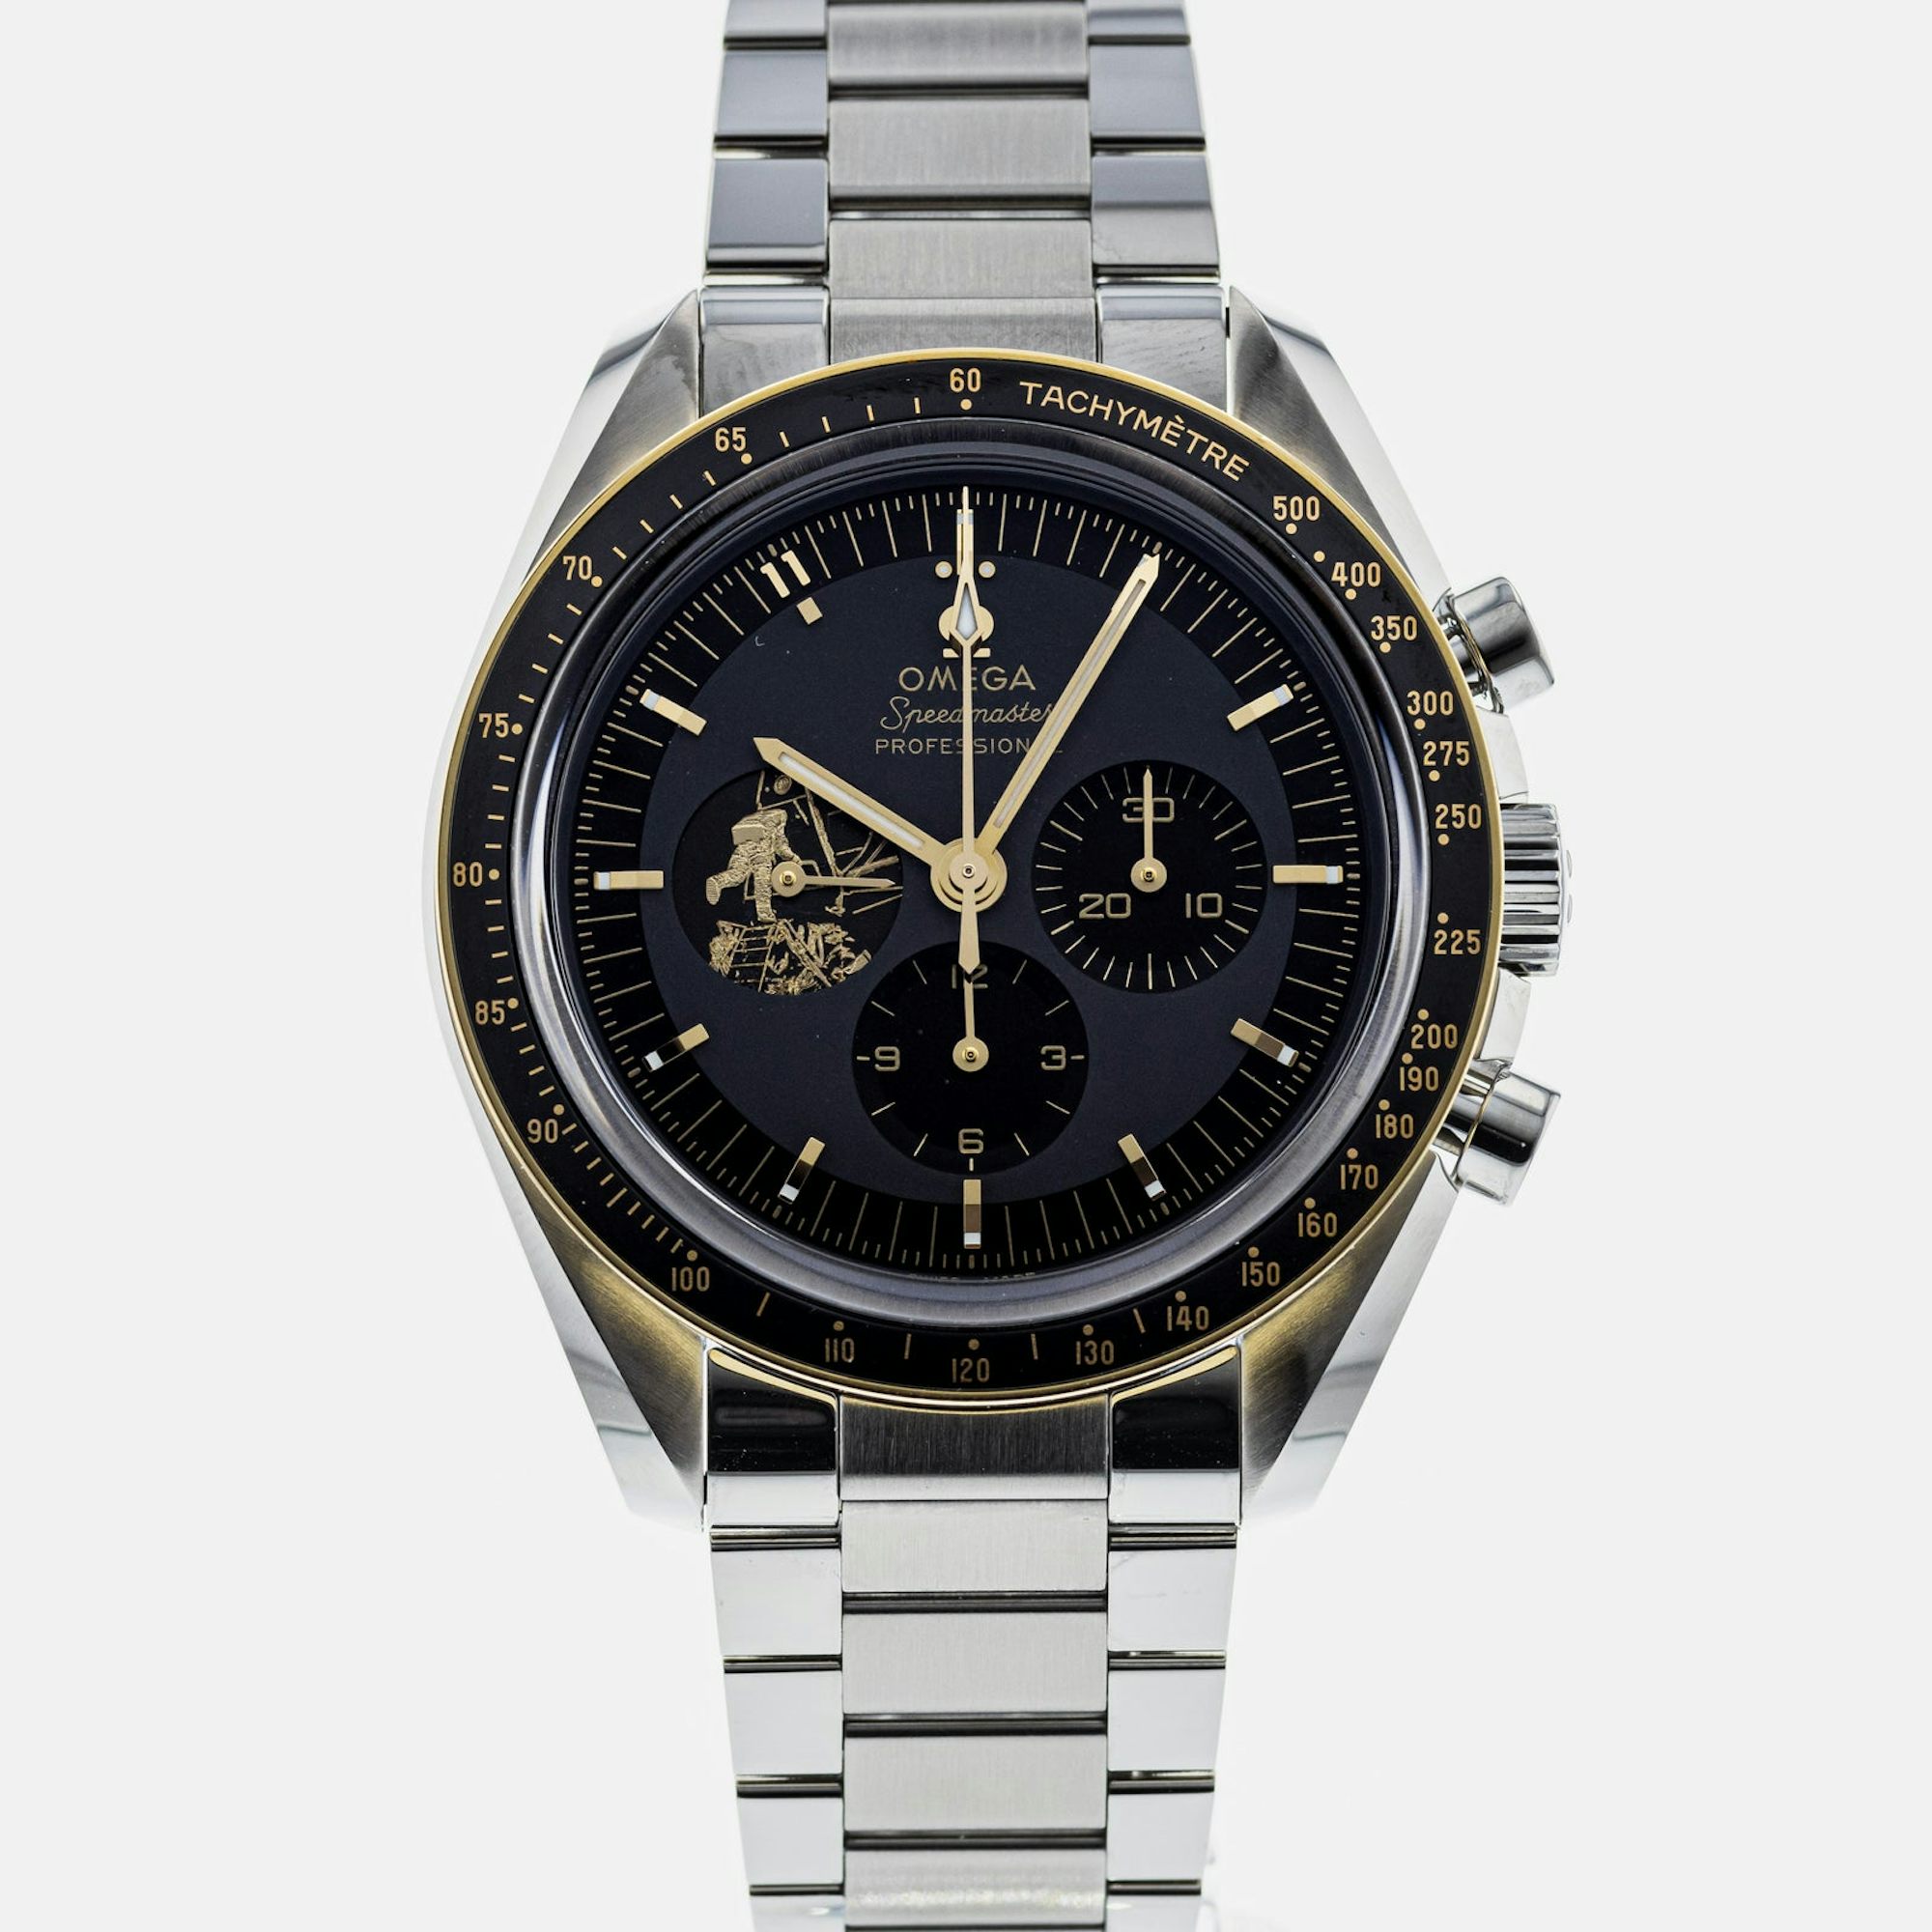 A soldier image of an OMEGA Speedmaster Moonwatch Anniversary Limited Series Apollo II 50th Anniversary Limited Edition